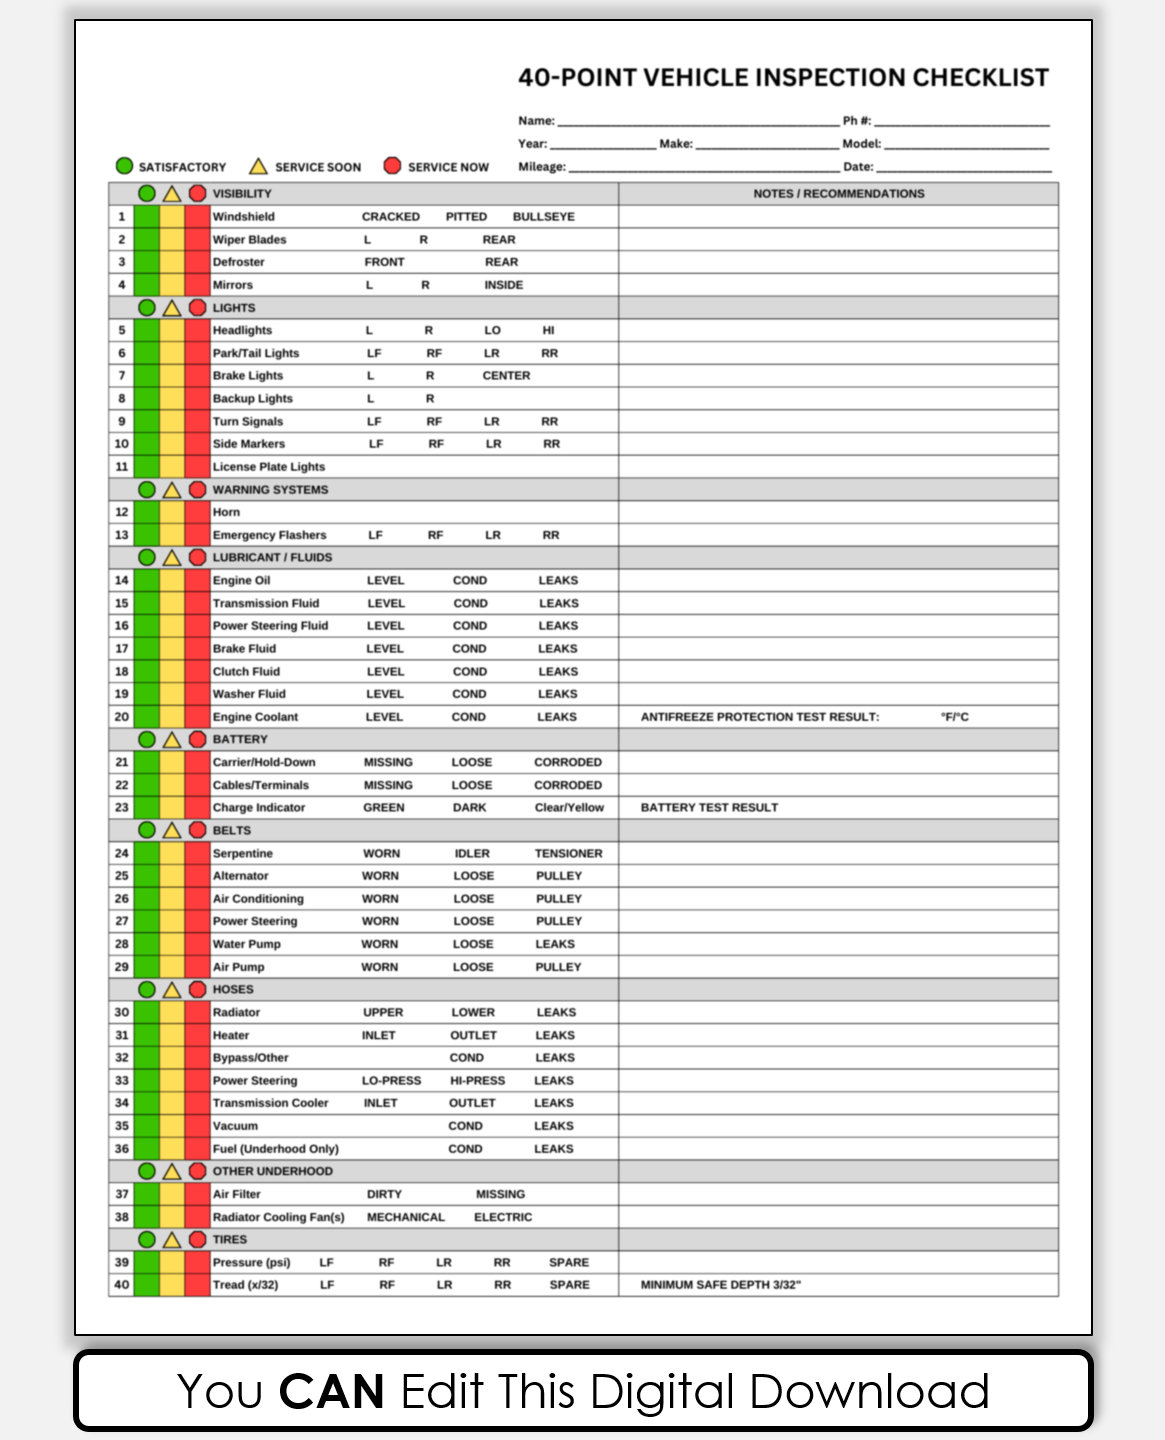 40-point Vehicle Inspection Report, Multi-point Inspection